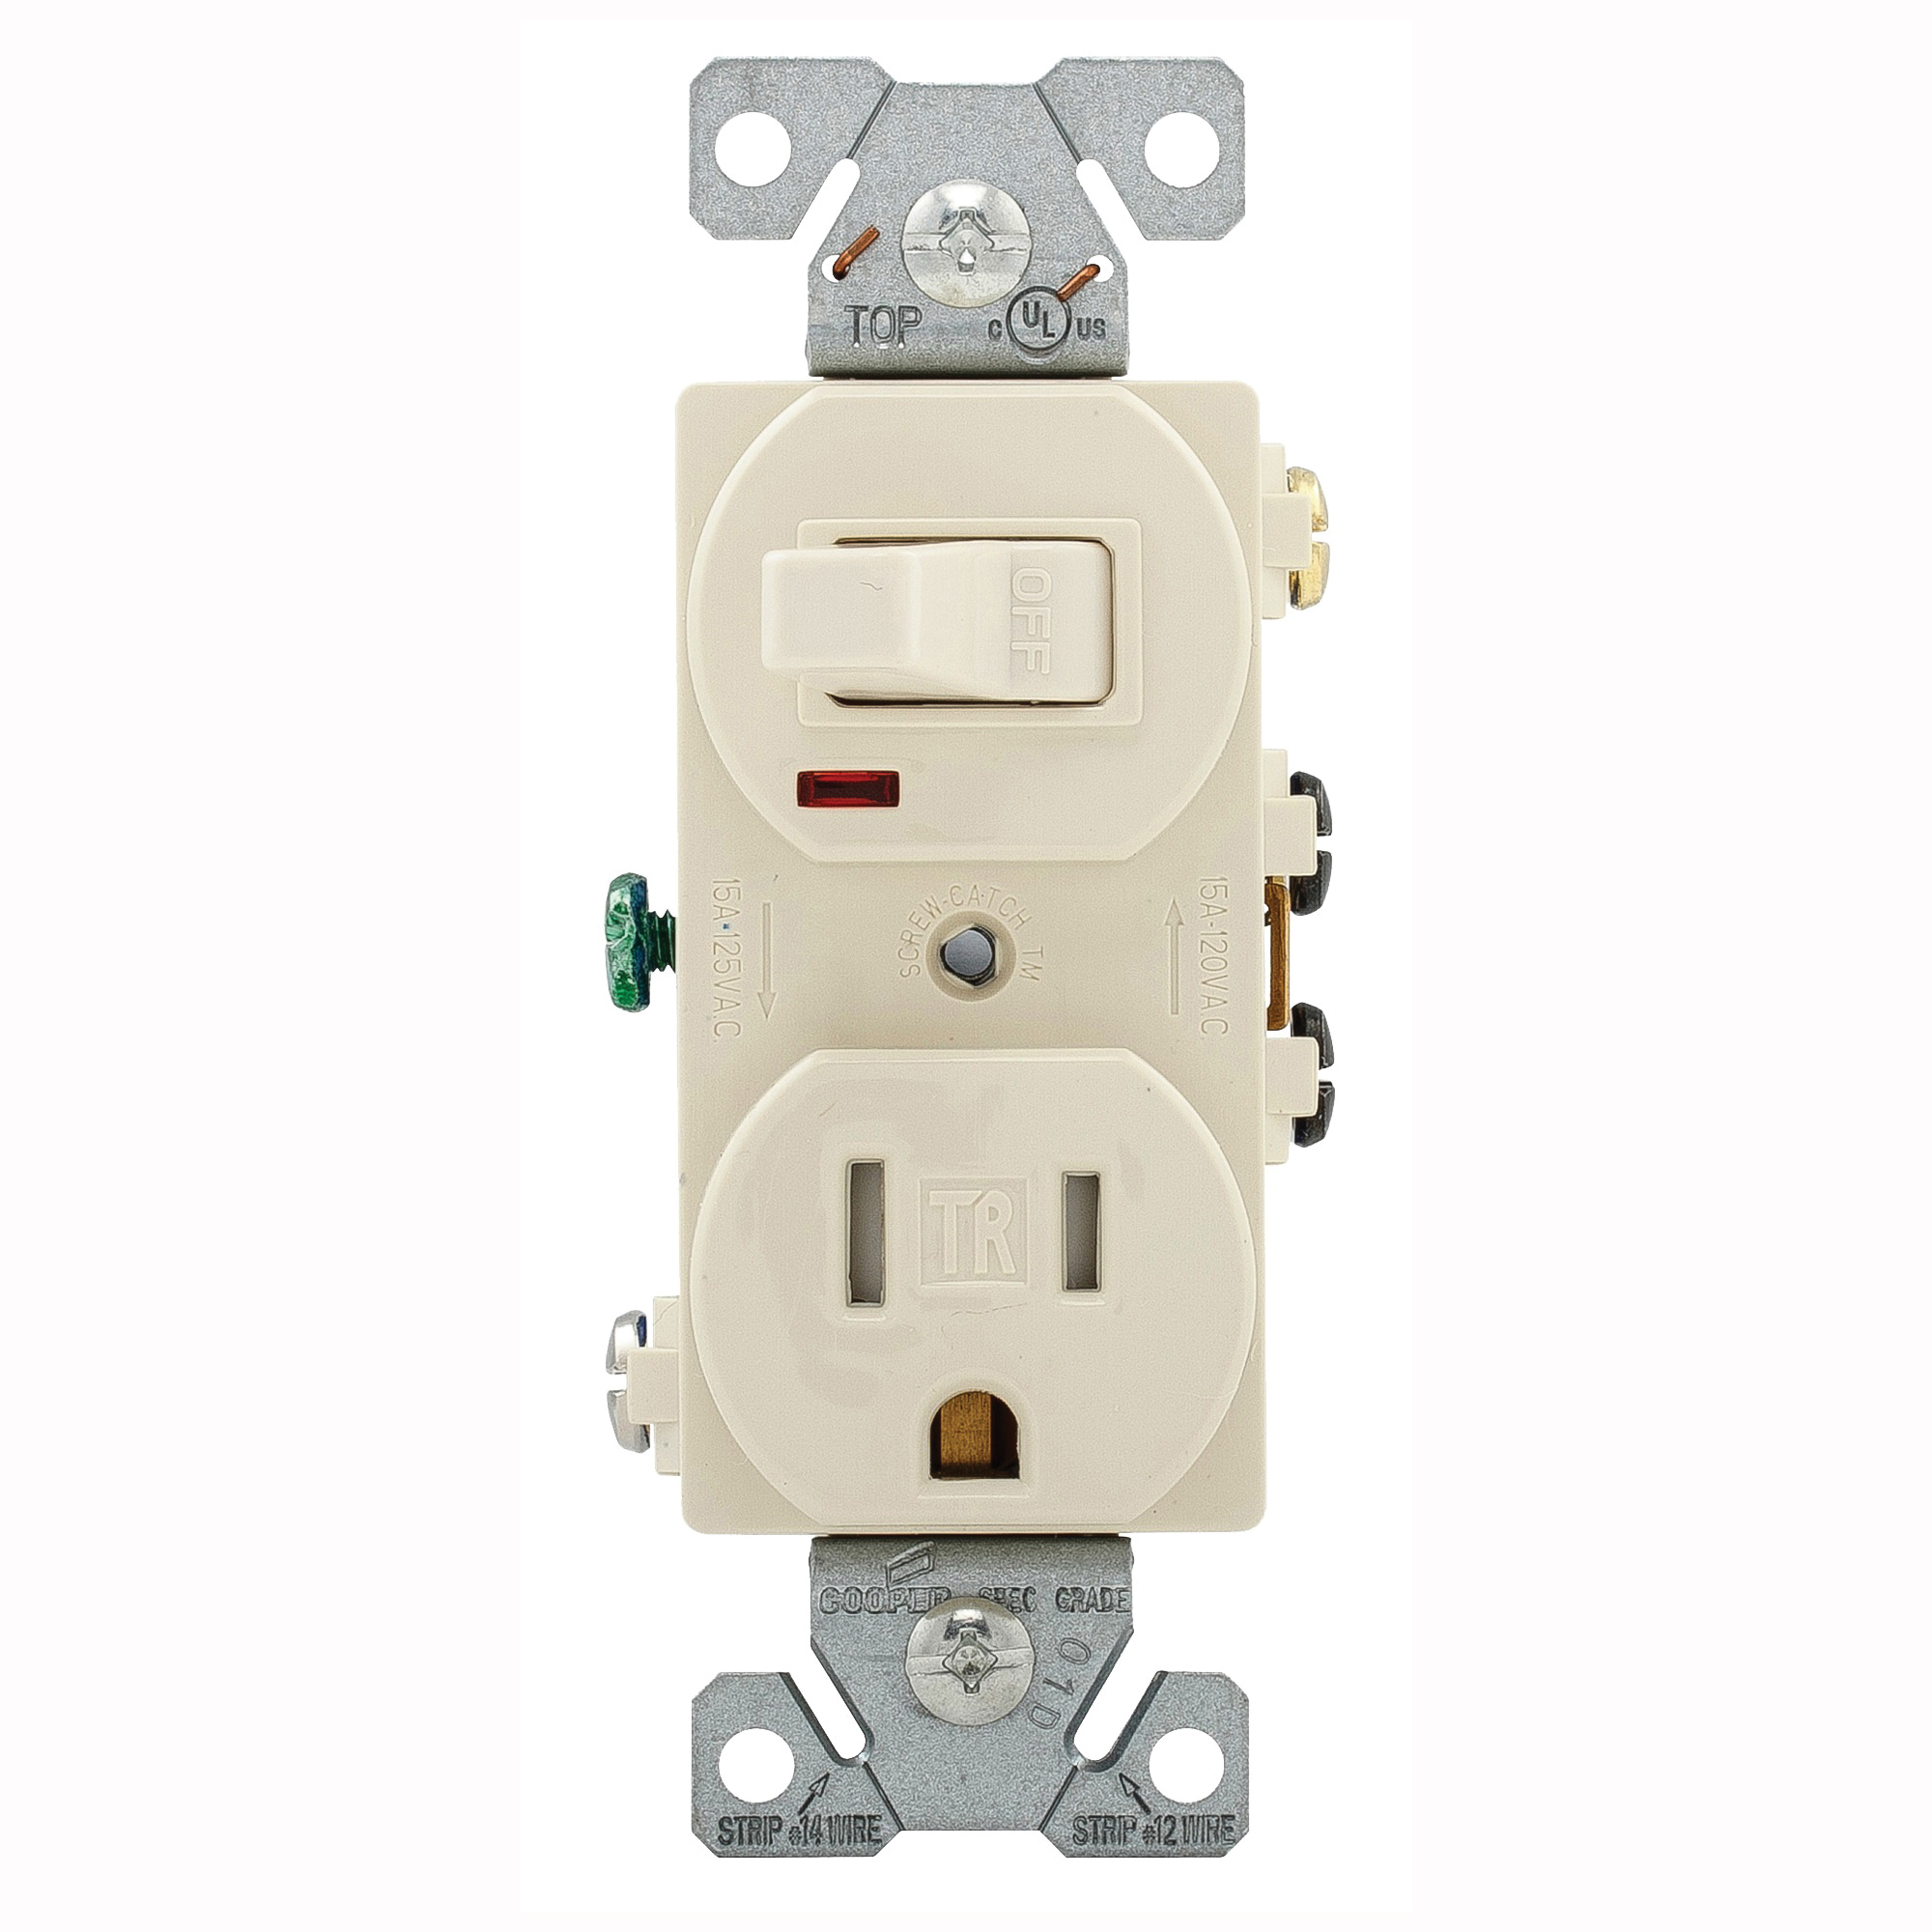 TR274LA Combination Switch/Receptacle, 2 -Pole, 15 A, 120 V Switch, 125 V Receptacle